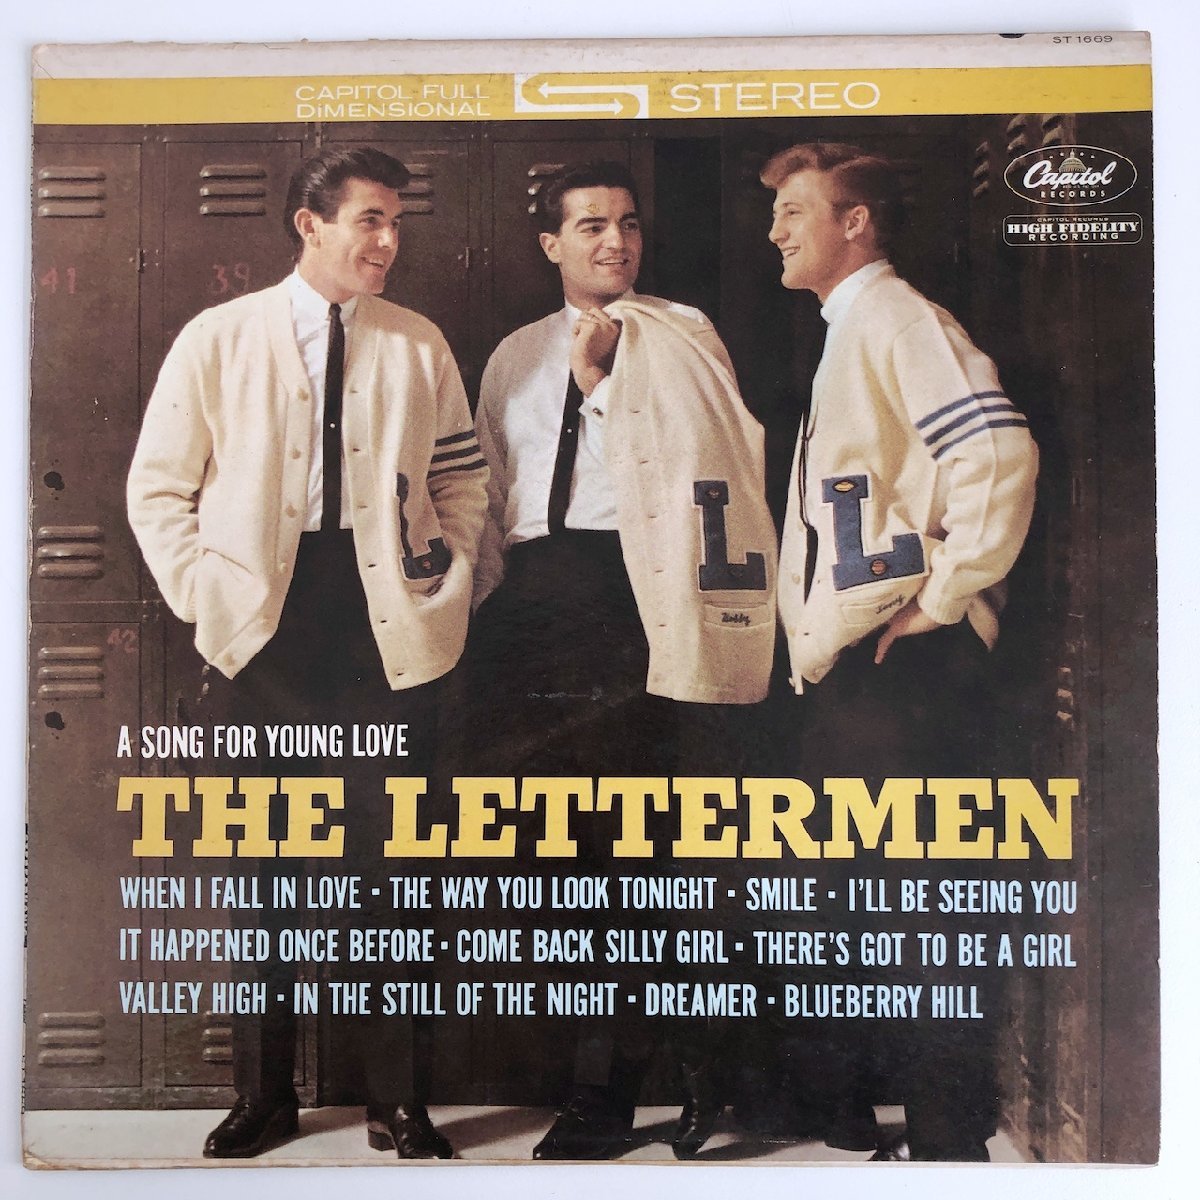 LP/ THE LETTERMEN / A SONG FOR YOUNG LOVE / US盤 オリジナル レインボーラベル CAPITOL ST1669 40212_画像1